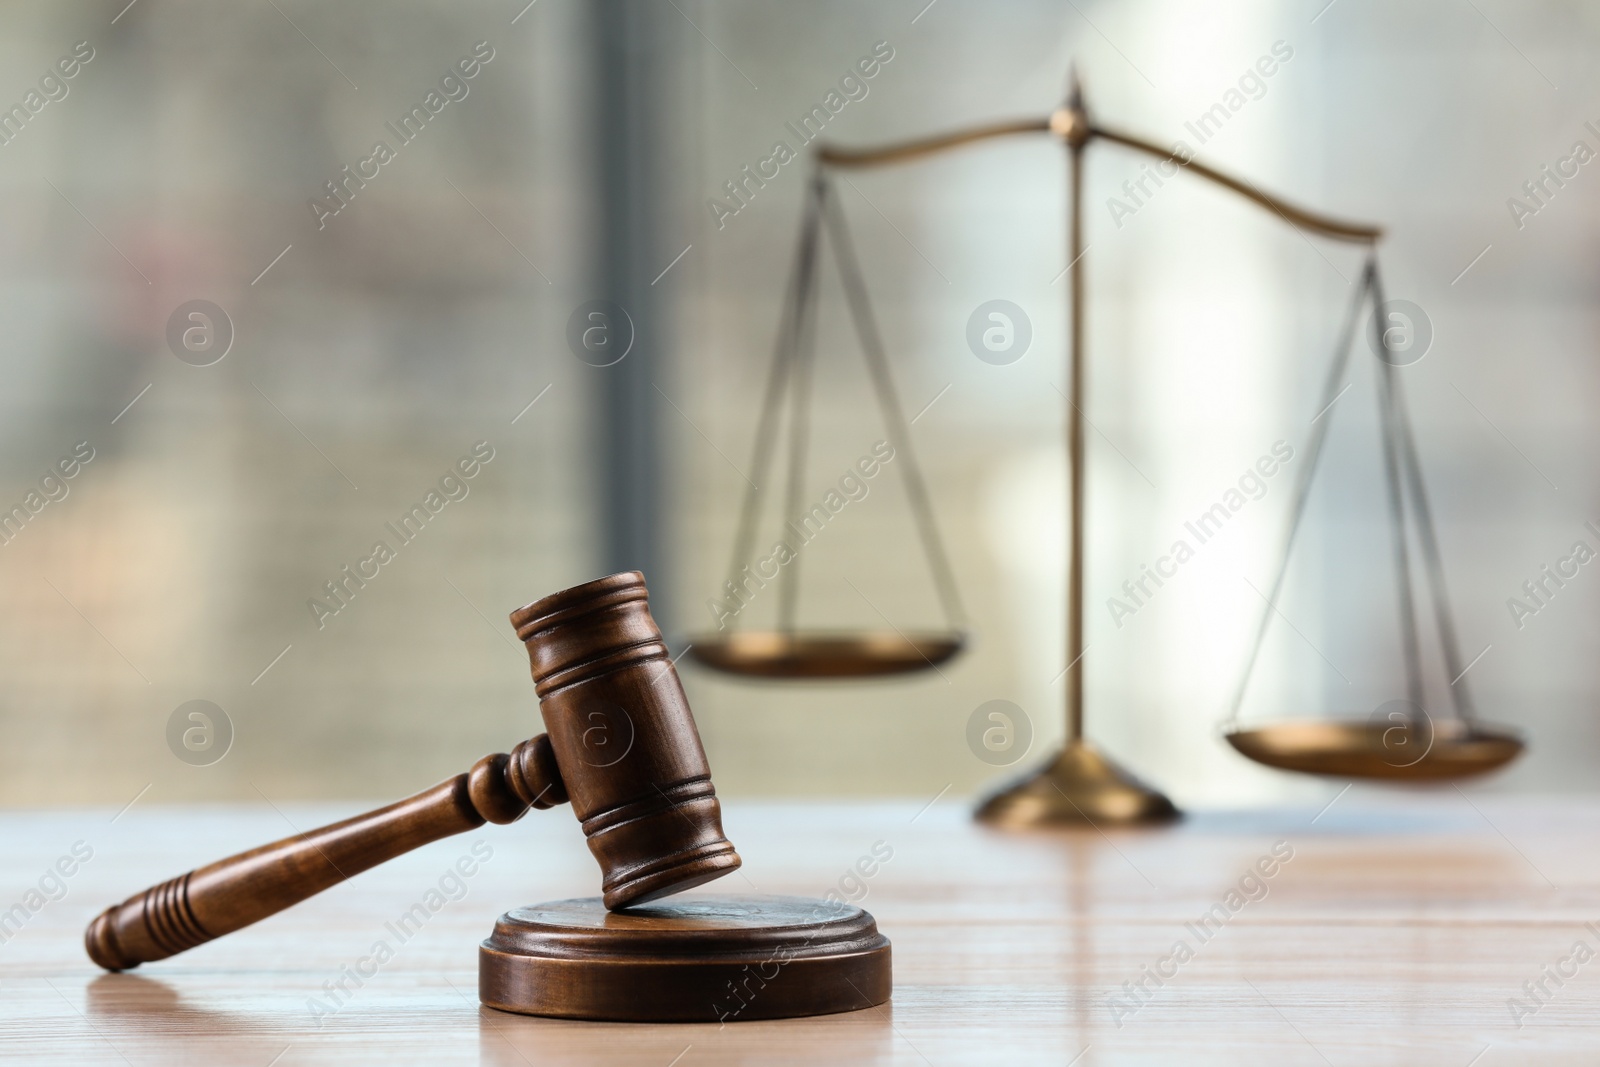 Photo of Wooden gavel and scales of justice on table indoors. Space for text